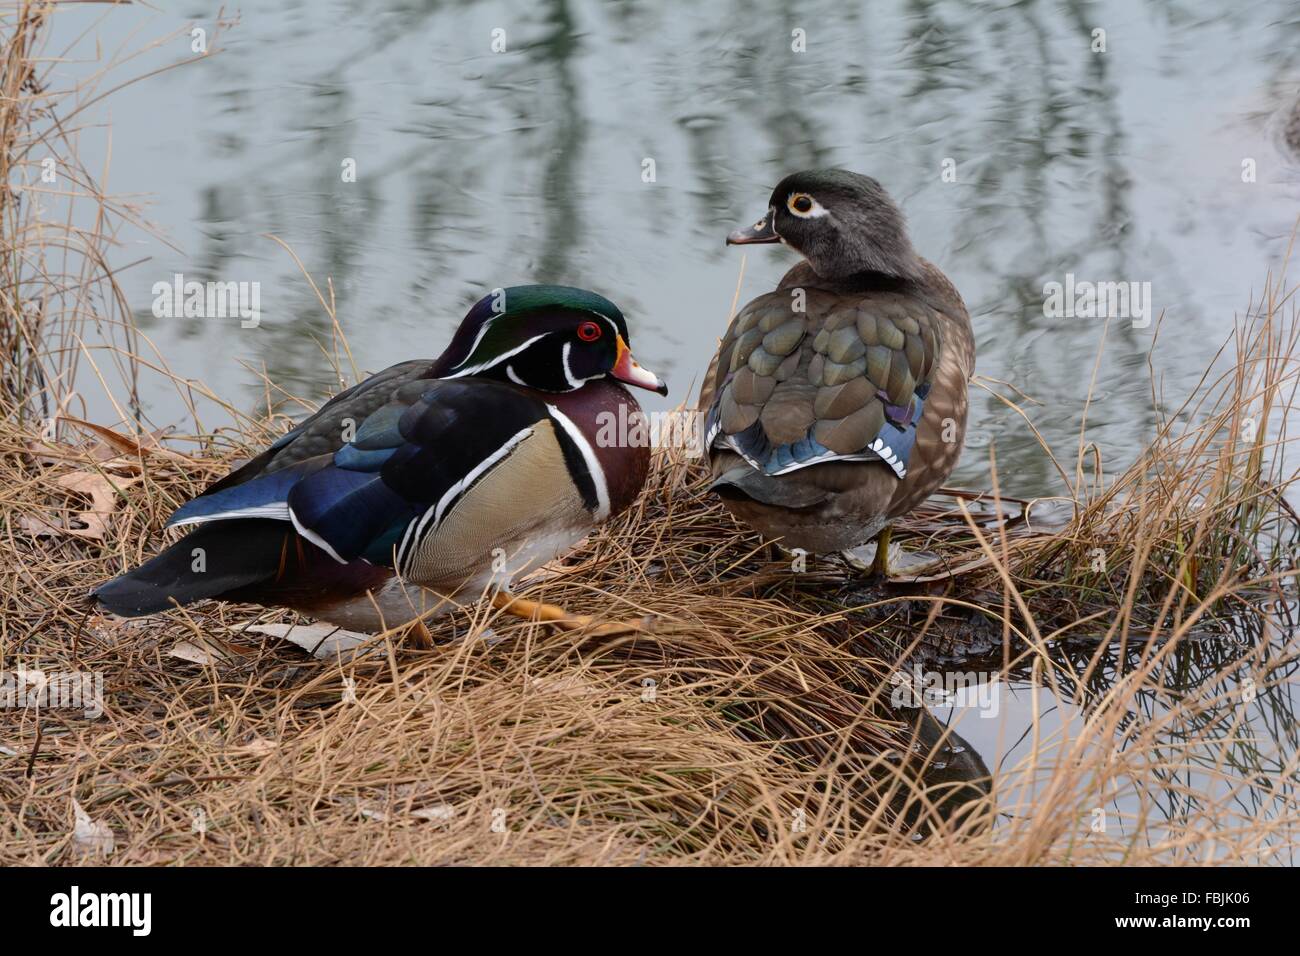 Wood Duck pair sitting together on edge of a pond, New Mexico Stock Photo